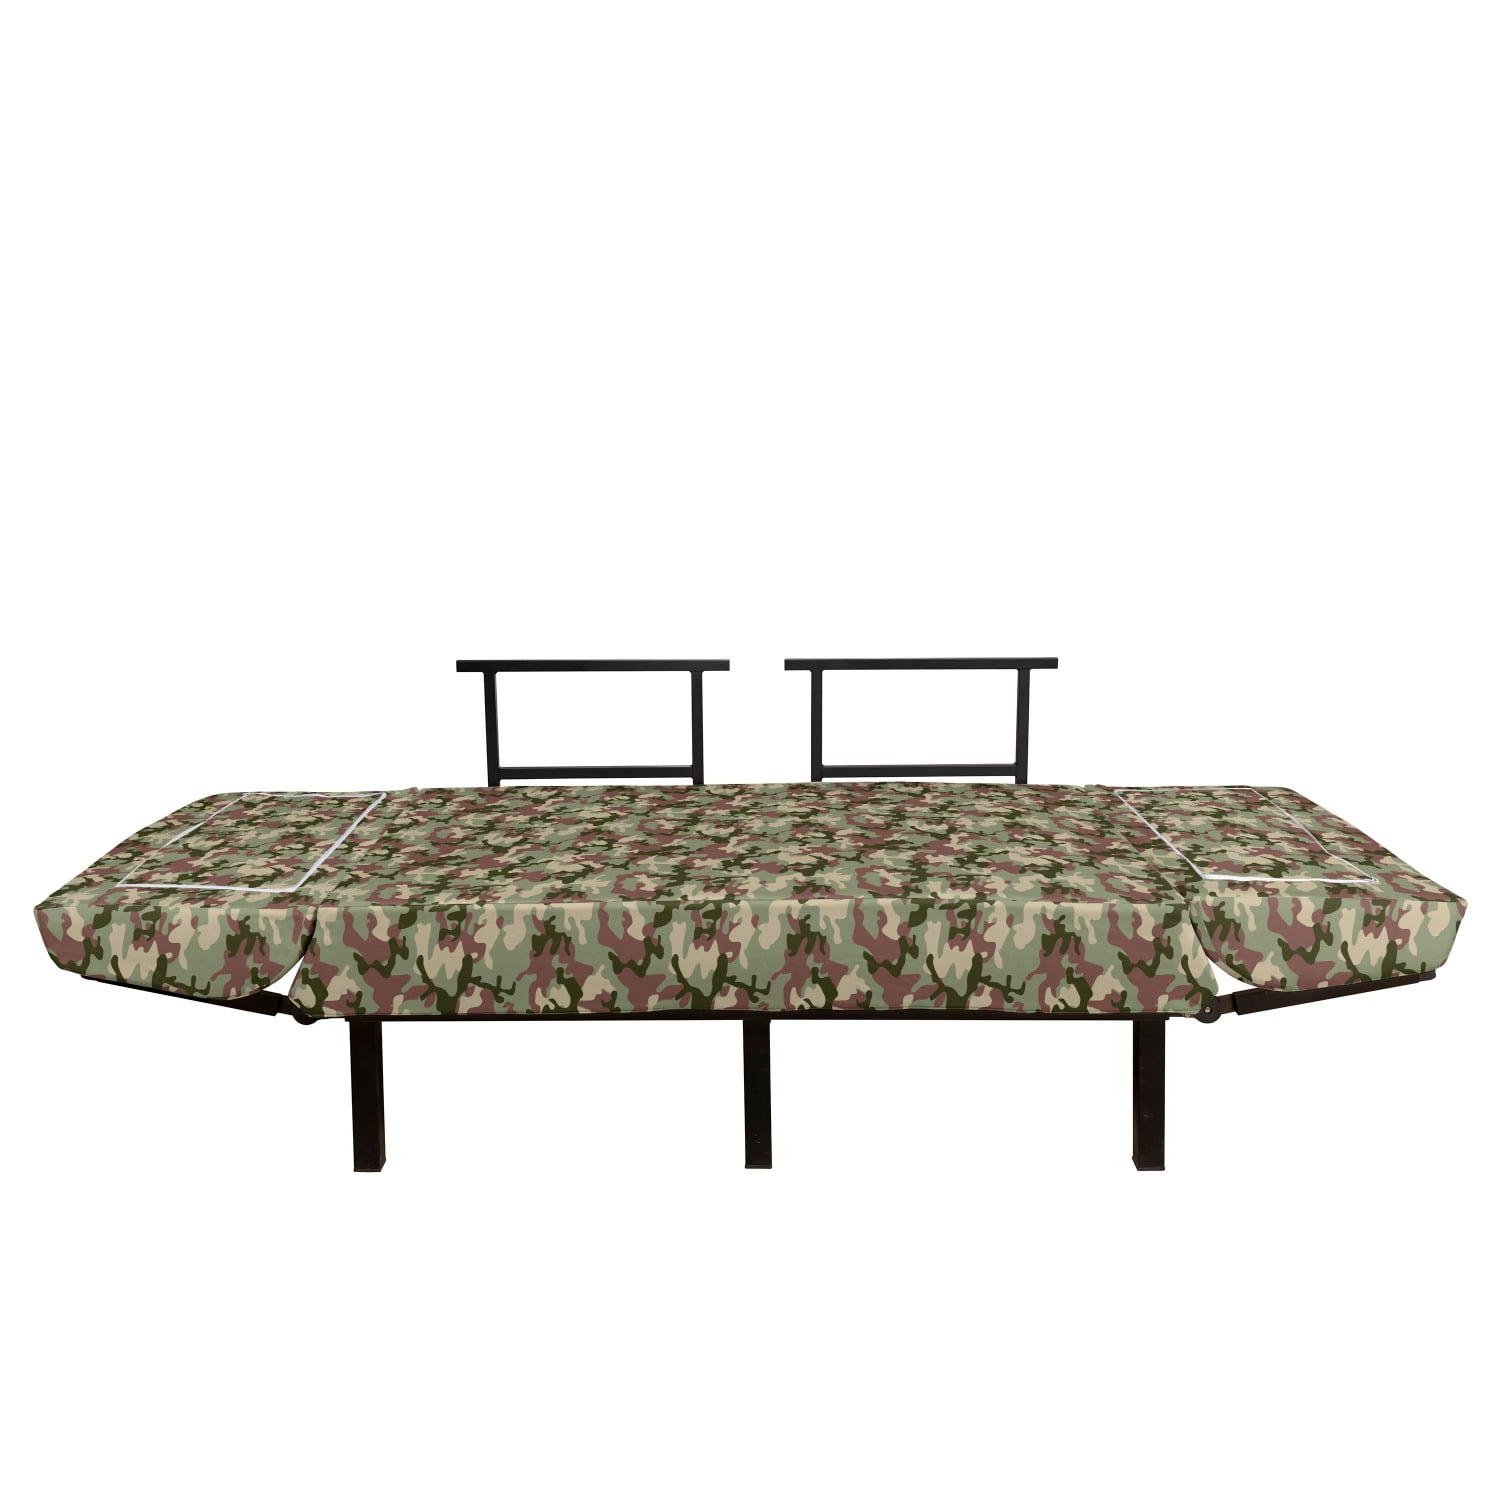 Daybed with Metal Frame Upholstered Sofa for Living Dorm Illustrated Green Camouflage in Forest Colors Hunter Theme Dark Green Army Green Ambesonne Camo Futon Couch Loveseat